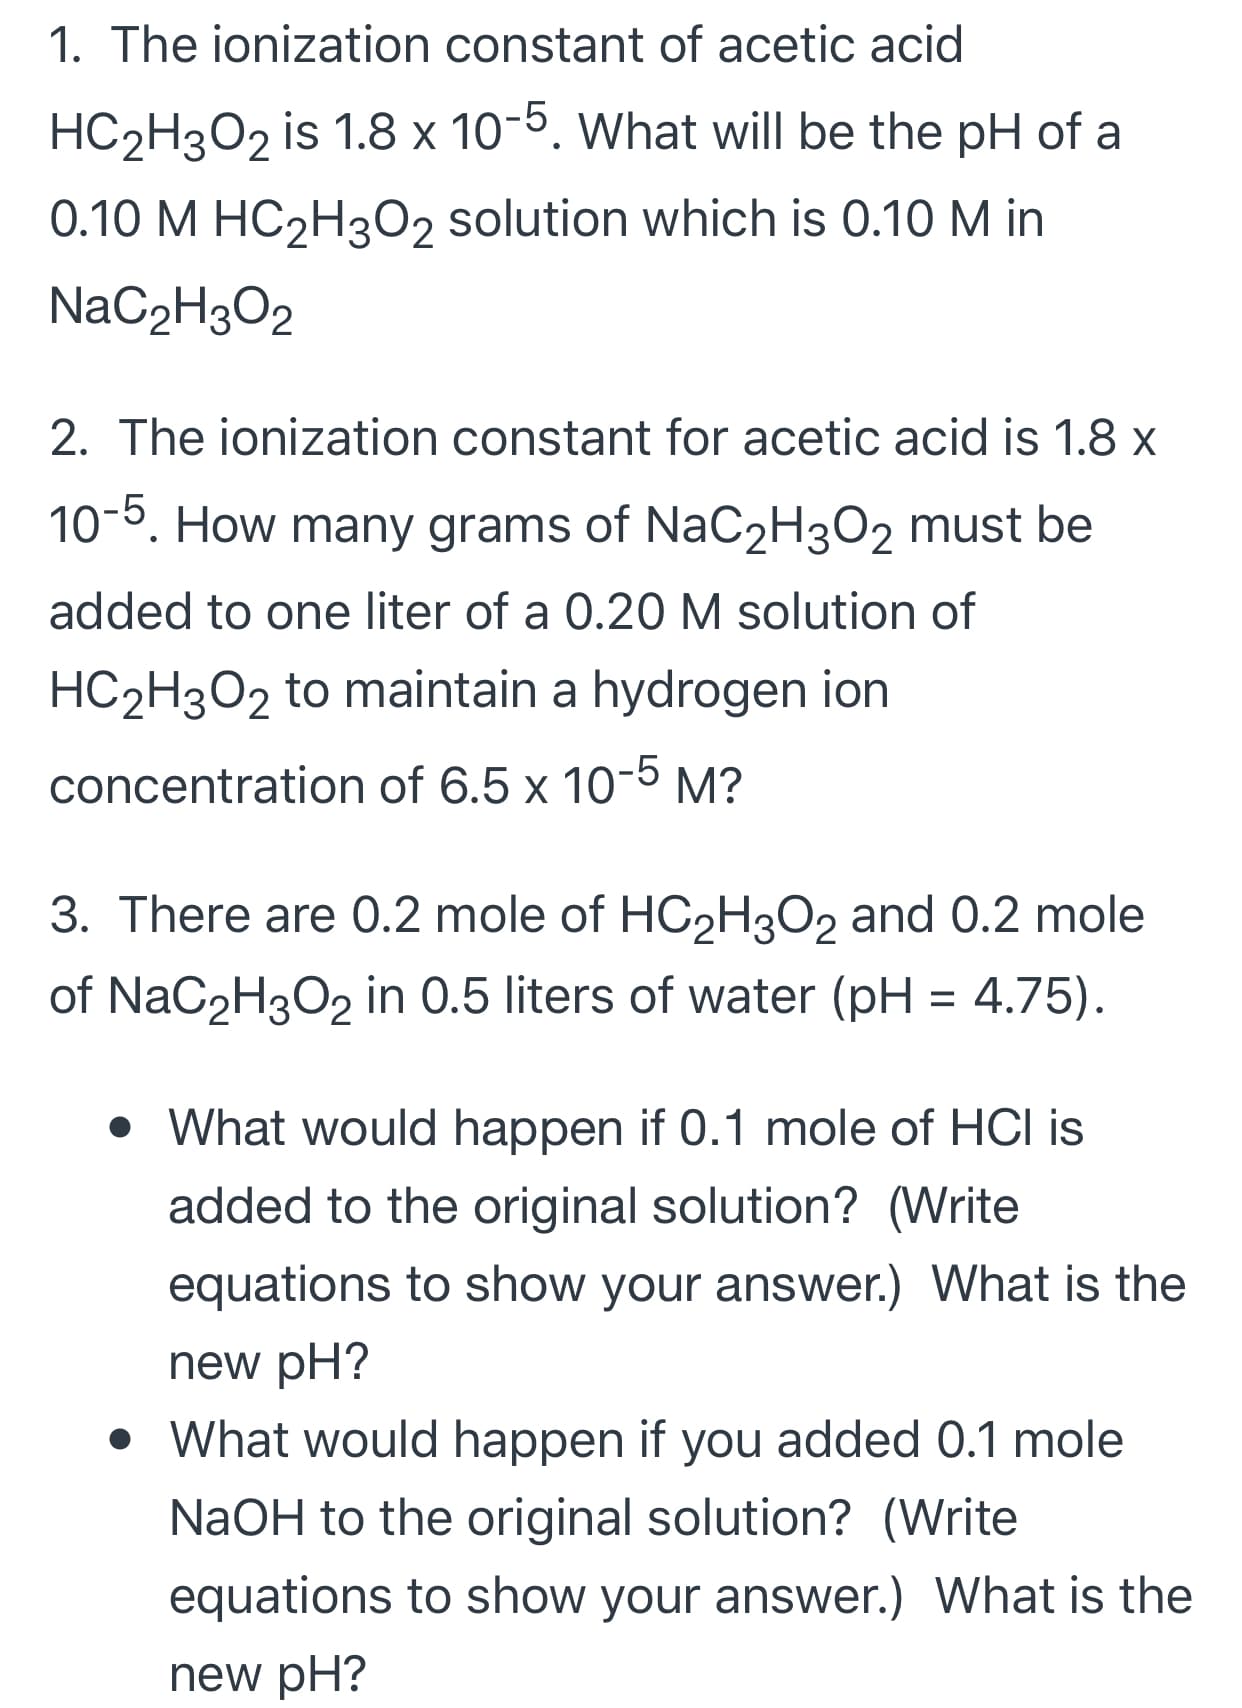 1. The ionization constant of acetic acid
HC2H3O2 is 1.8 x 10-5. What will be the pH of a
0.10 M HC2H3O2 solution which is 0.10 M in
NaC2H3O2
2. The ionization constant for acetic acid is 1.8 x
10-5. How many grams of NaC2H3O2 must be
added to one liter of a 0.20 M solution of
HC2H3O2 to maintain a hydrogen ion
concentration of 6.5 x 10-5 M?
3. There are 0.2 mole of HC2H3O2 and 0.2 mole
of NaC2H3O2 in 0.5 liters of water (pH = 4.75).
• What would happen if 0.1 mole of HCI is
added to the original solution? (Write
equations to show your answer.) What is the
new pH?
• What would happen if you added 0.1 mole
NaOH to the original solution? (Write
equations to show your answer.) What is the
new pH?
